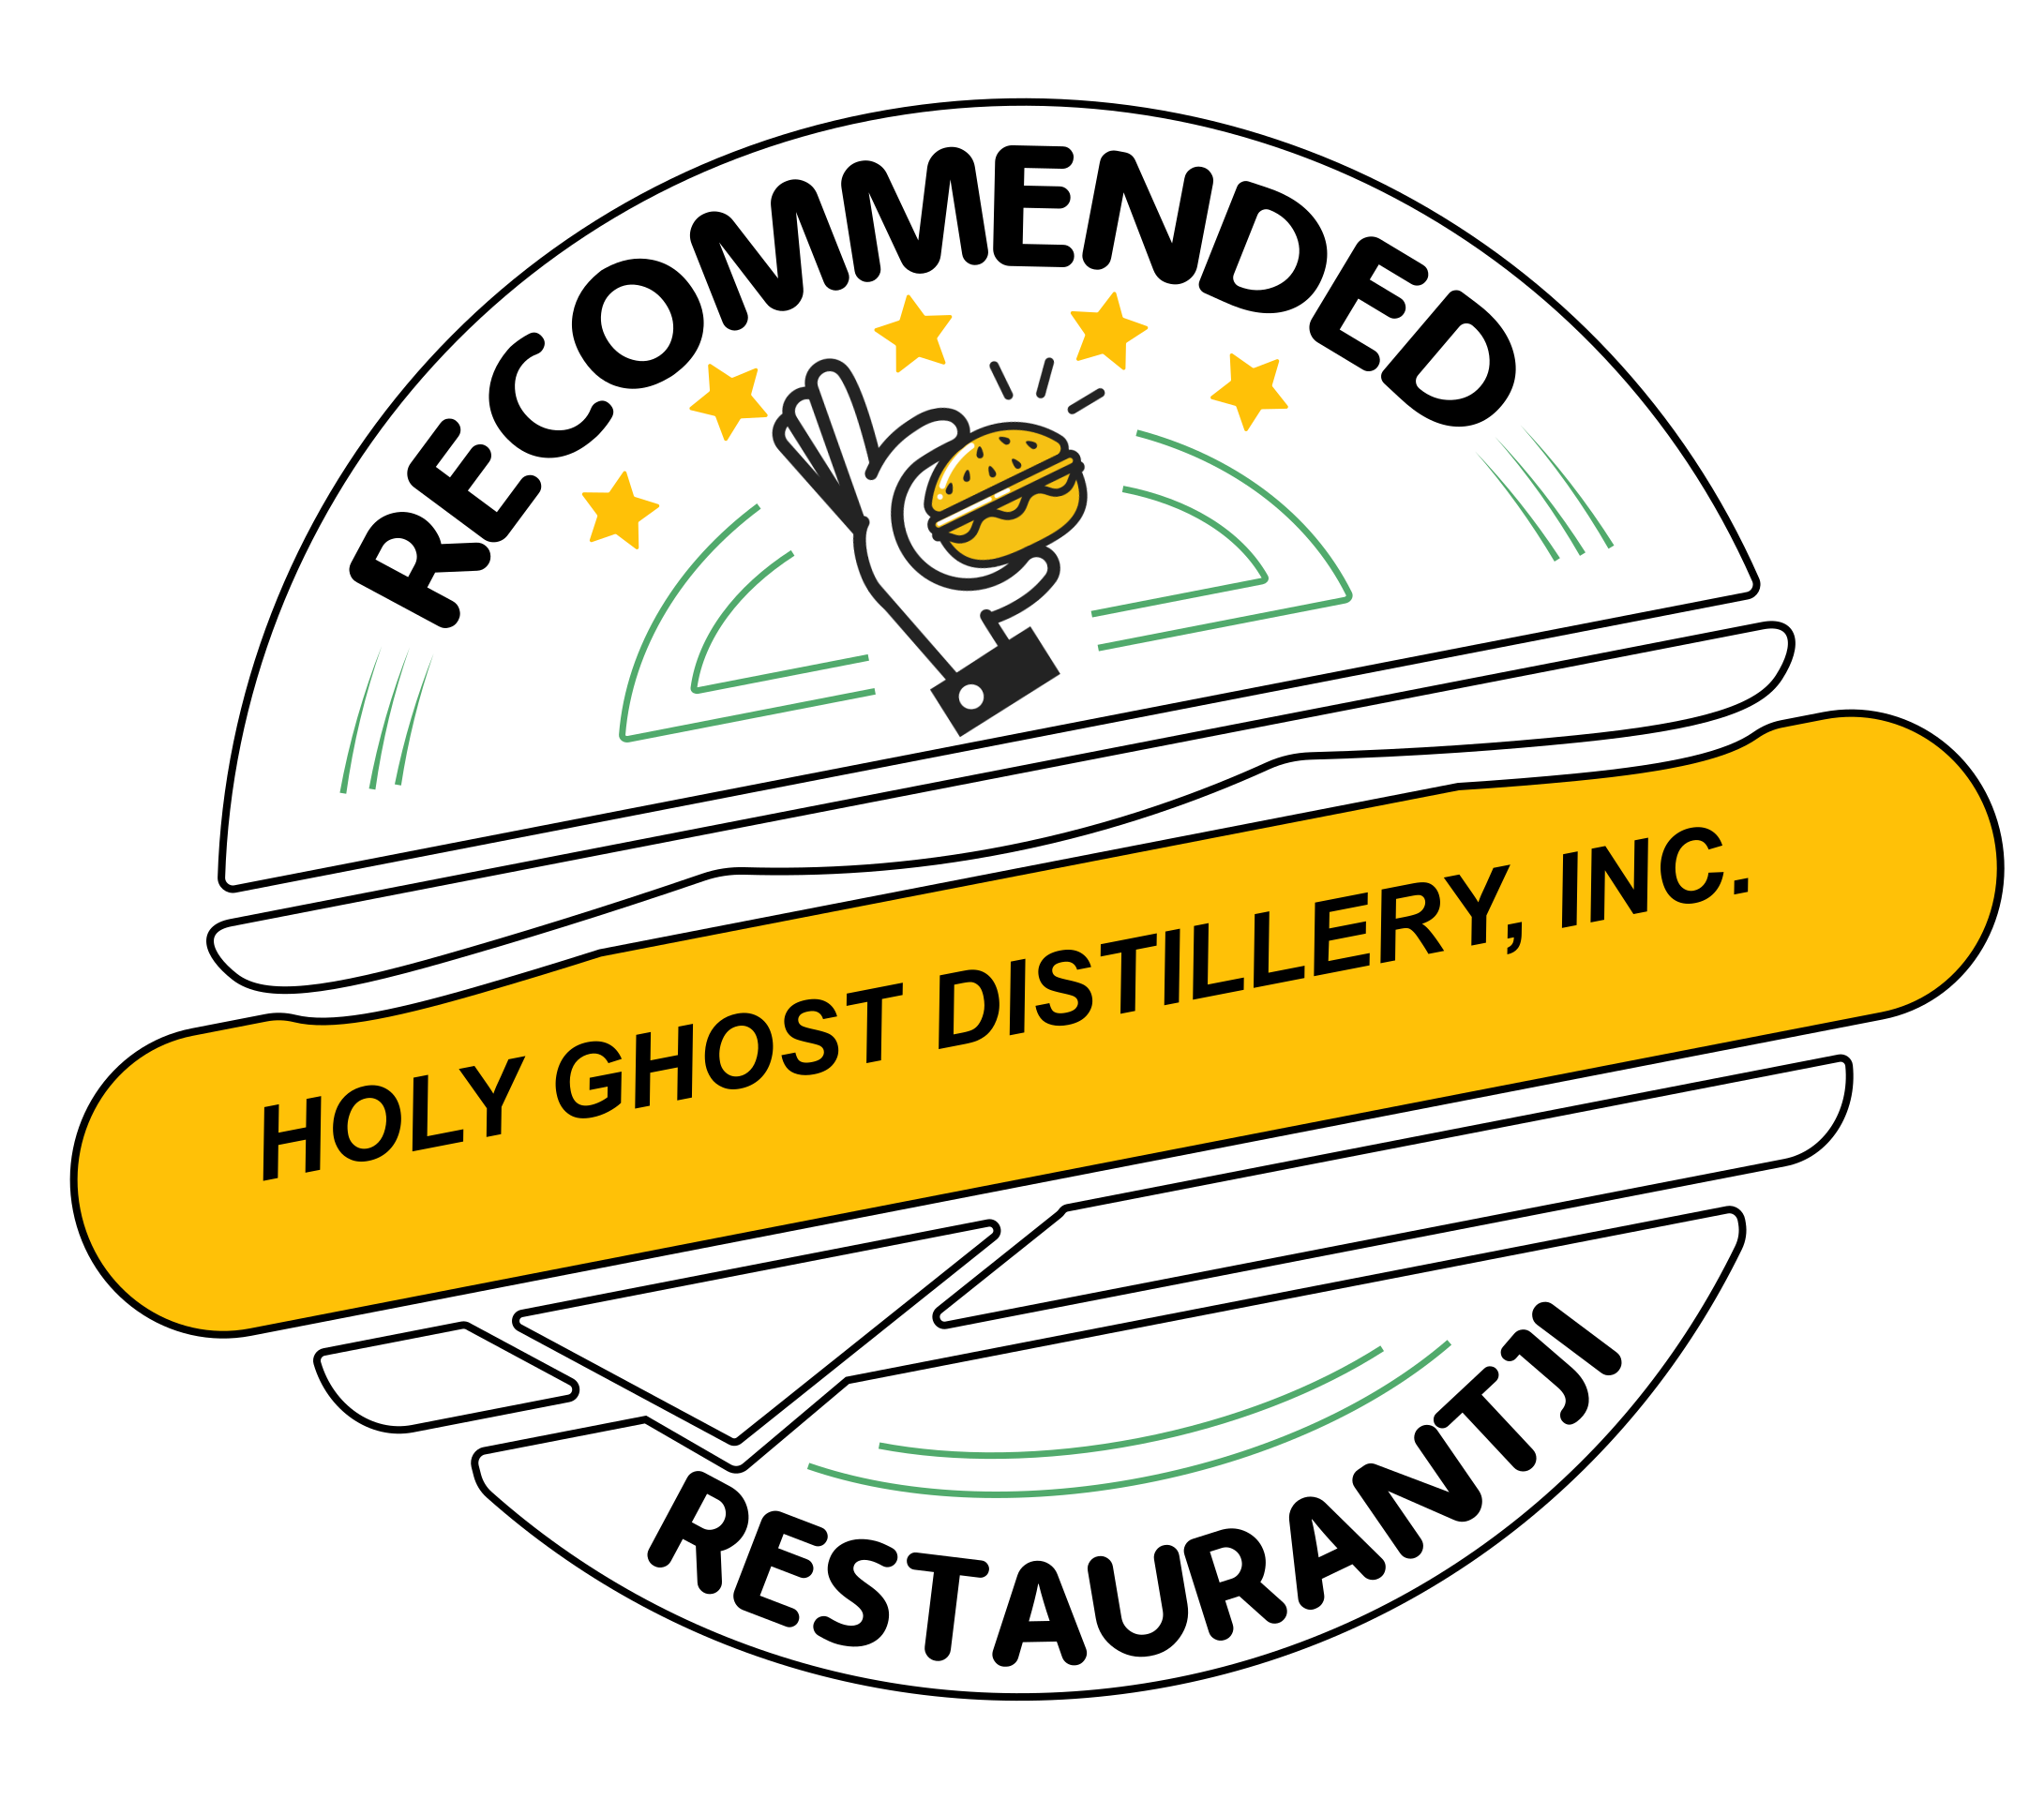 Holy Ghost Distillery, Inc. has earned accolades from Restaurantji - a user-friendly platform for discovering the finest local restaurants.